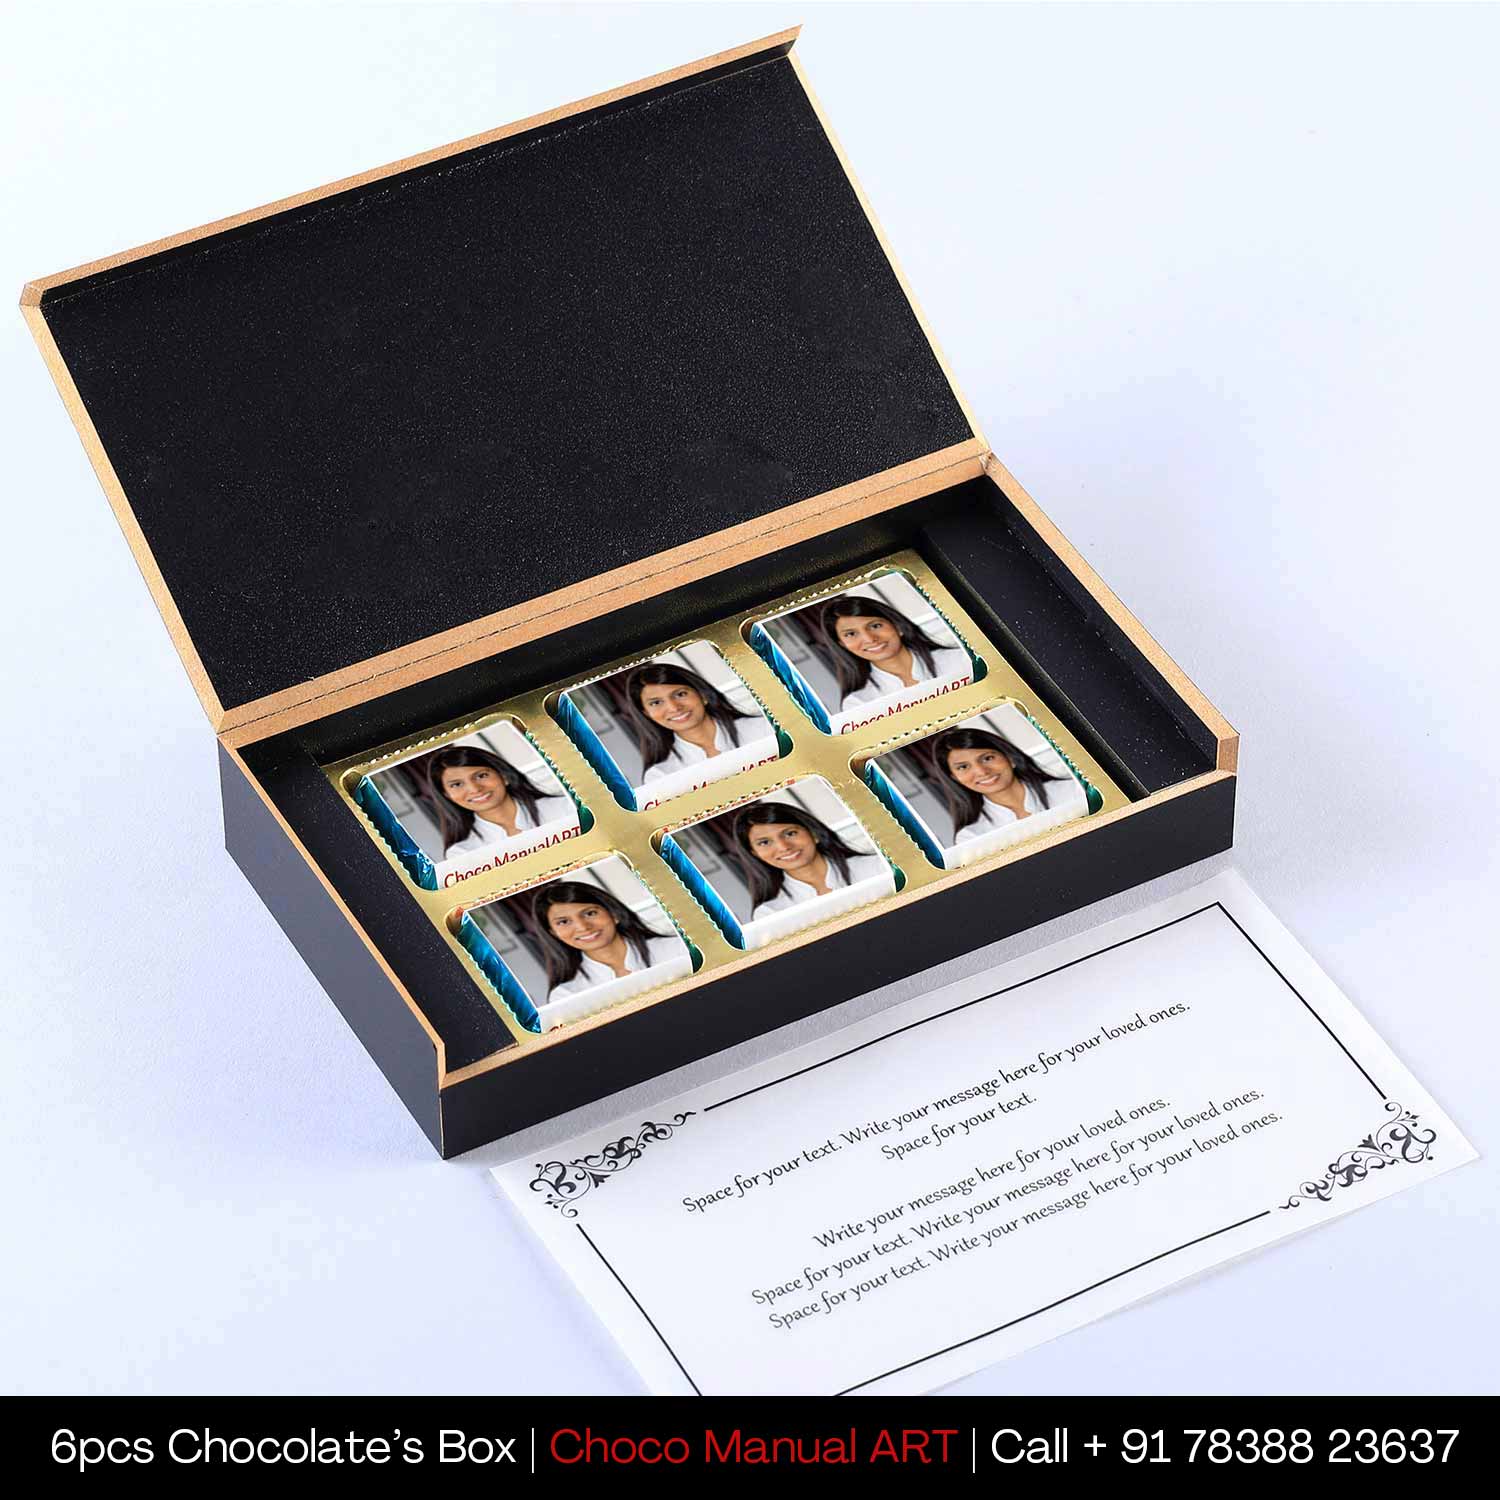 Corporate Chocolate Gift Ideas & Office Gifts for Employee's Birthdays I Elegant gift with wooden packaging